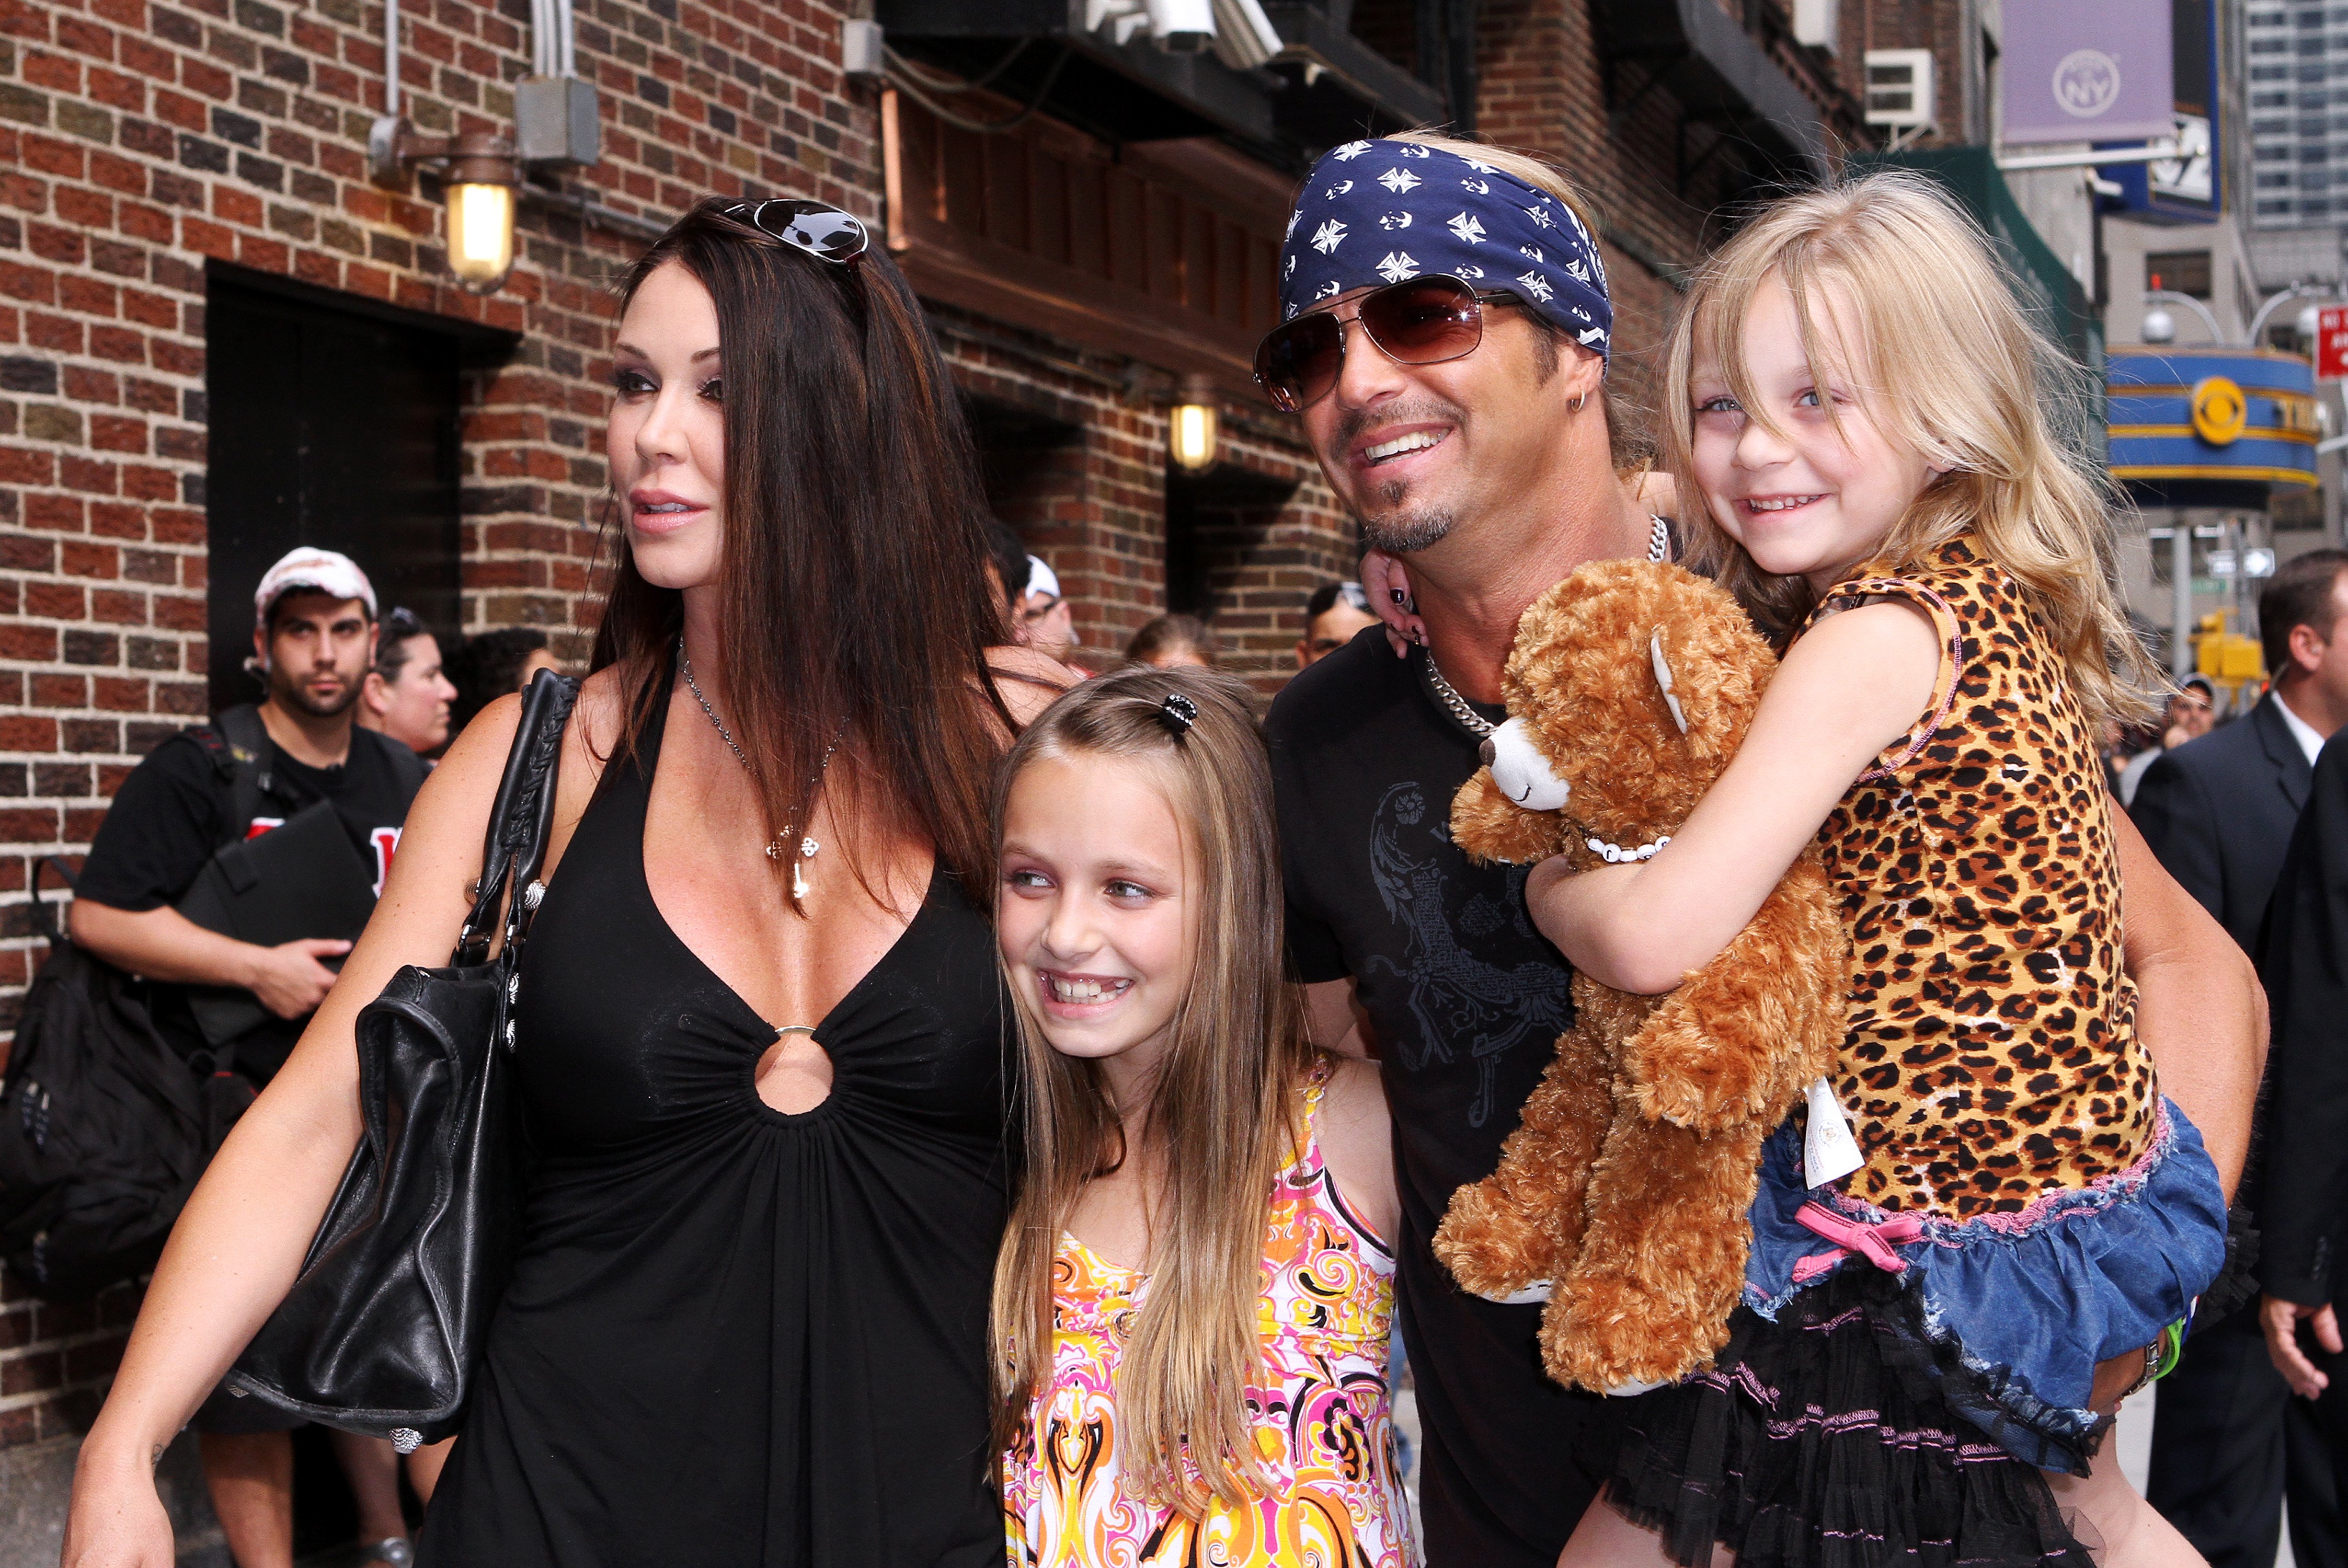 Kristi Lynn Gibson, Raine Elizabeth Michaels, Bret Michaels, and Jorja Bleu Michaels at the "Late Show With David Letterman" on July 12, 2010 | Source: Getty Images